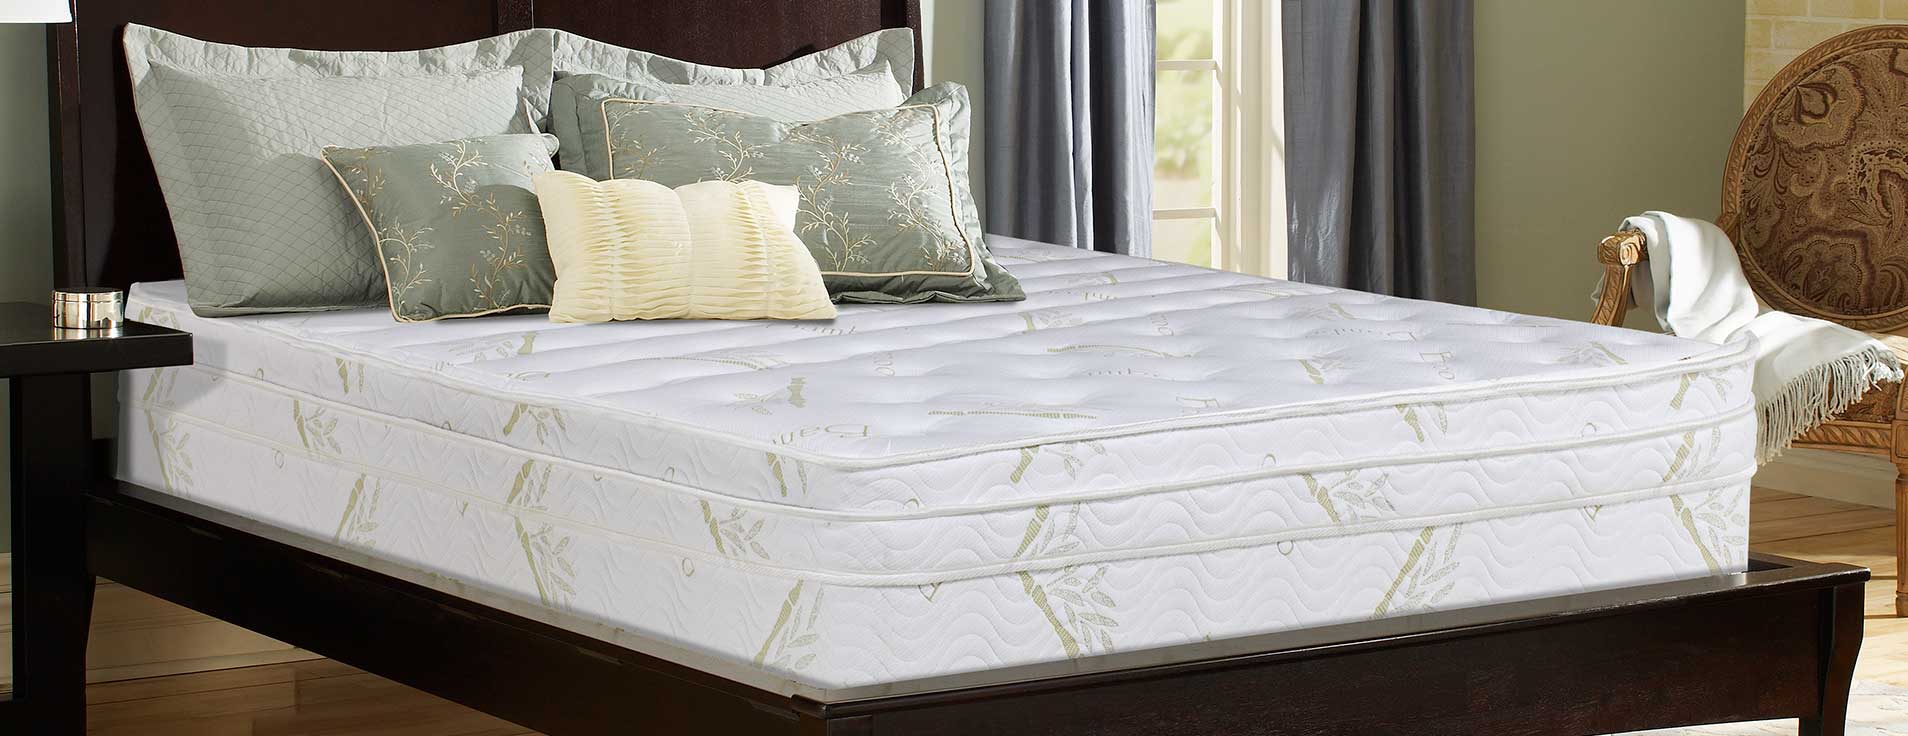 waterbed mattress strata boyd review